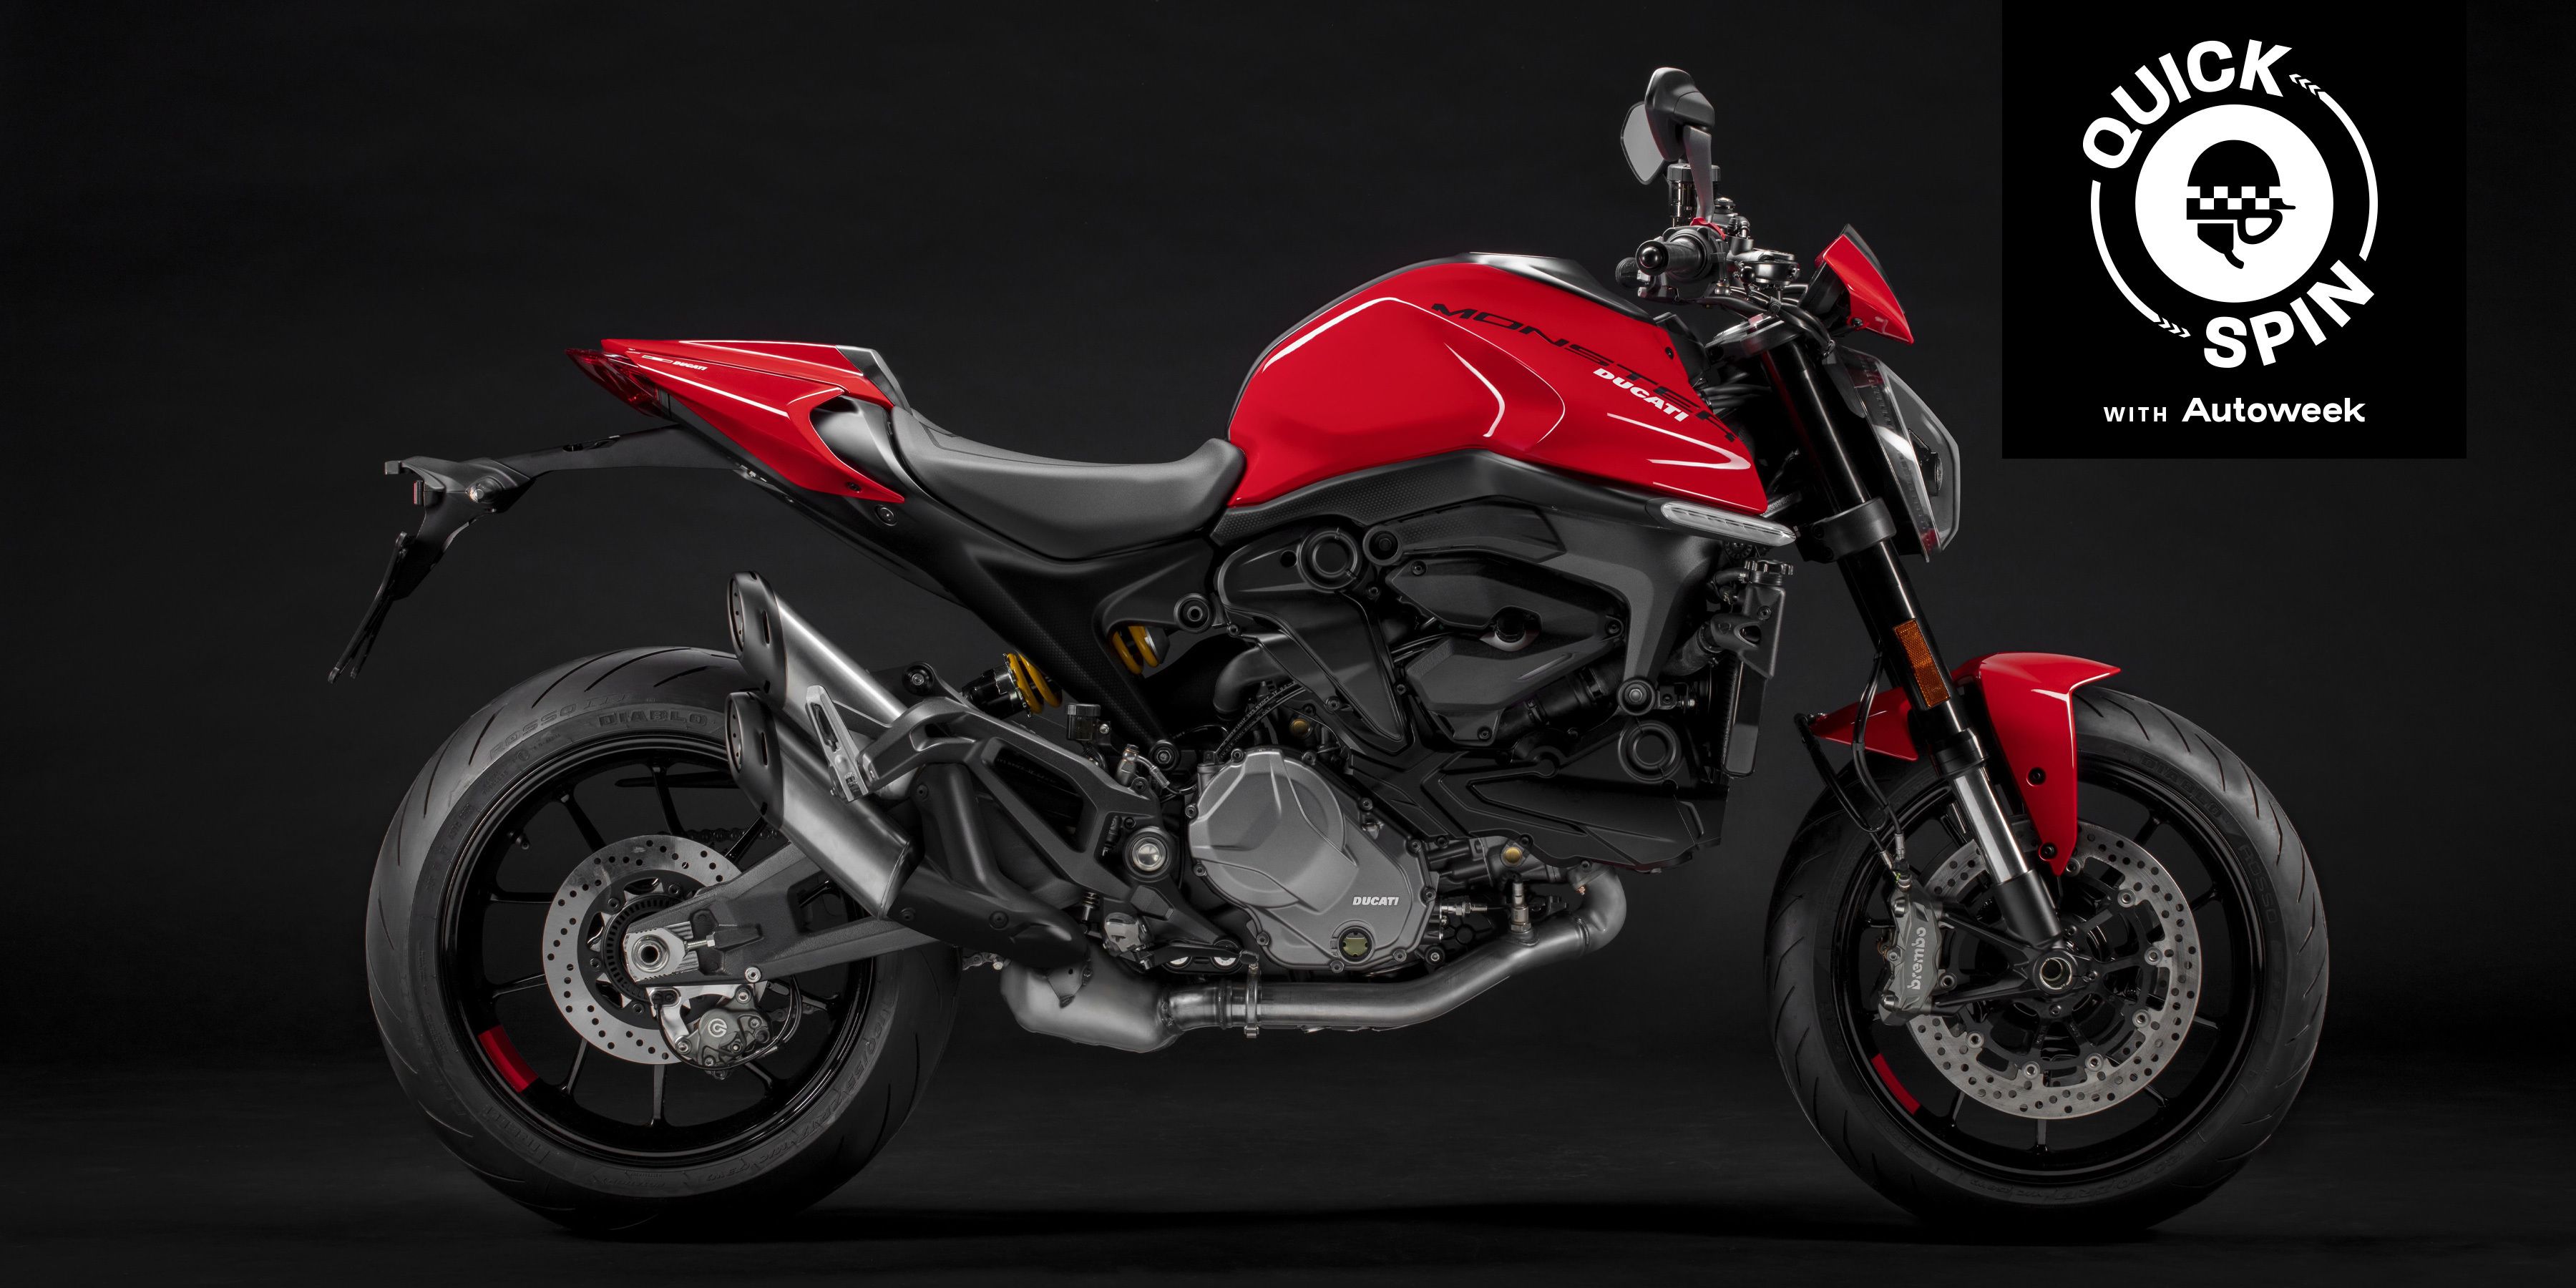 Honda's CB650R Brings Back Middleweight Roots